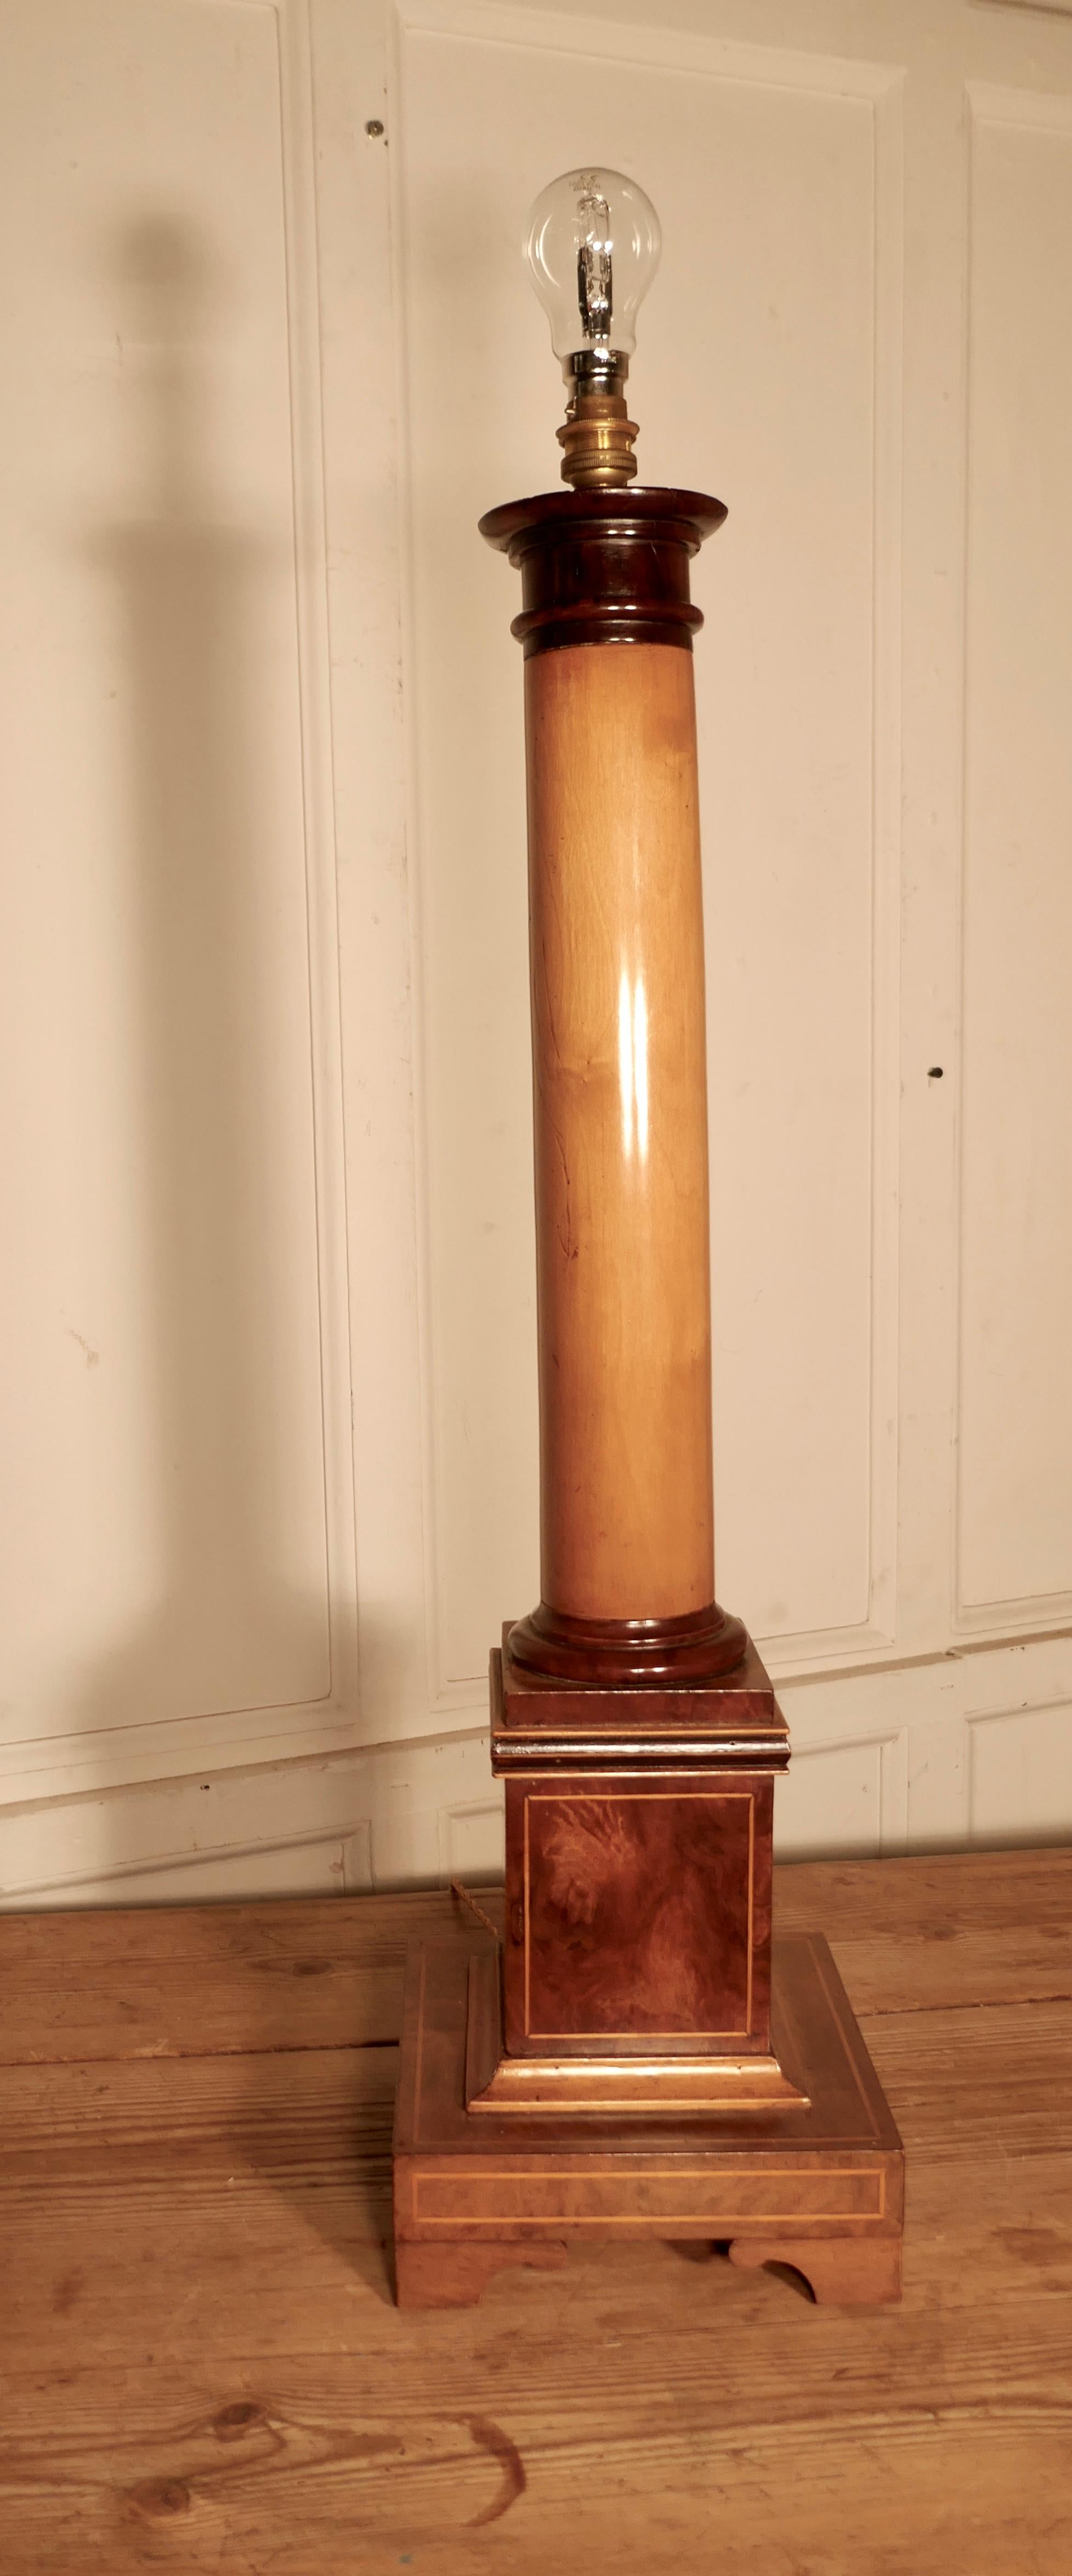 Pair of tall Art Deco maple and walnut column table lamps

These are a very stylish near pair of Corinthian column Art Deco lamps
The lamps vary very slightly in the colours of the woods used, the main columns are in maple and the bases are made